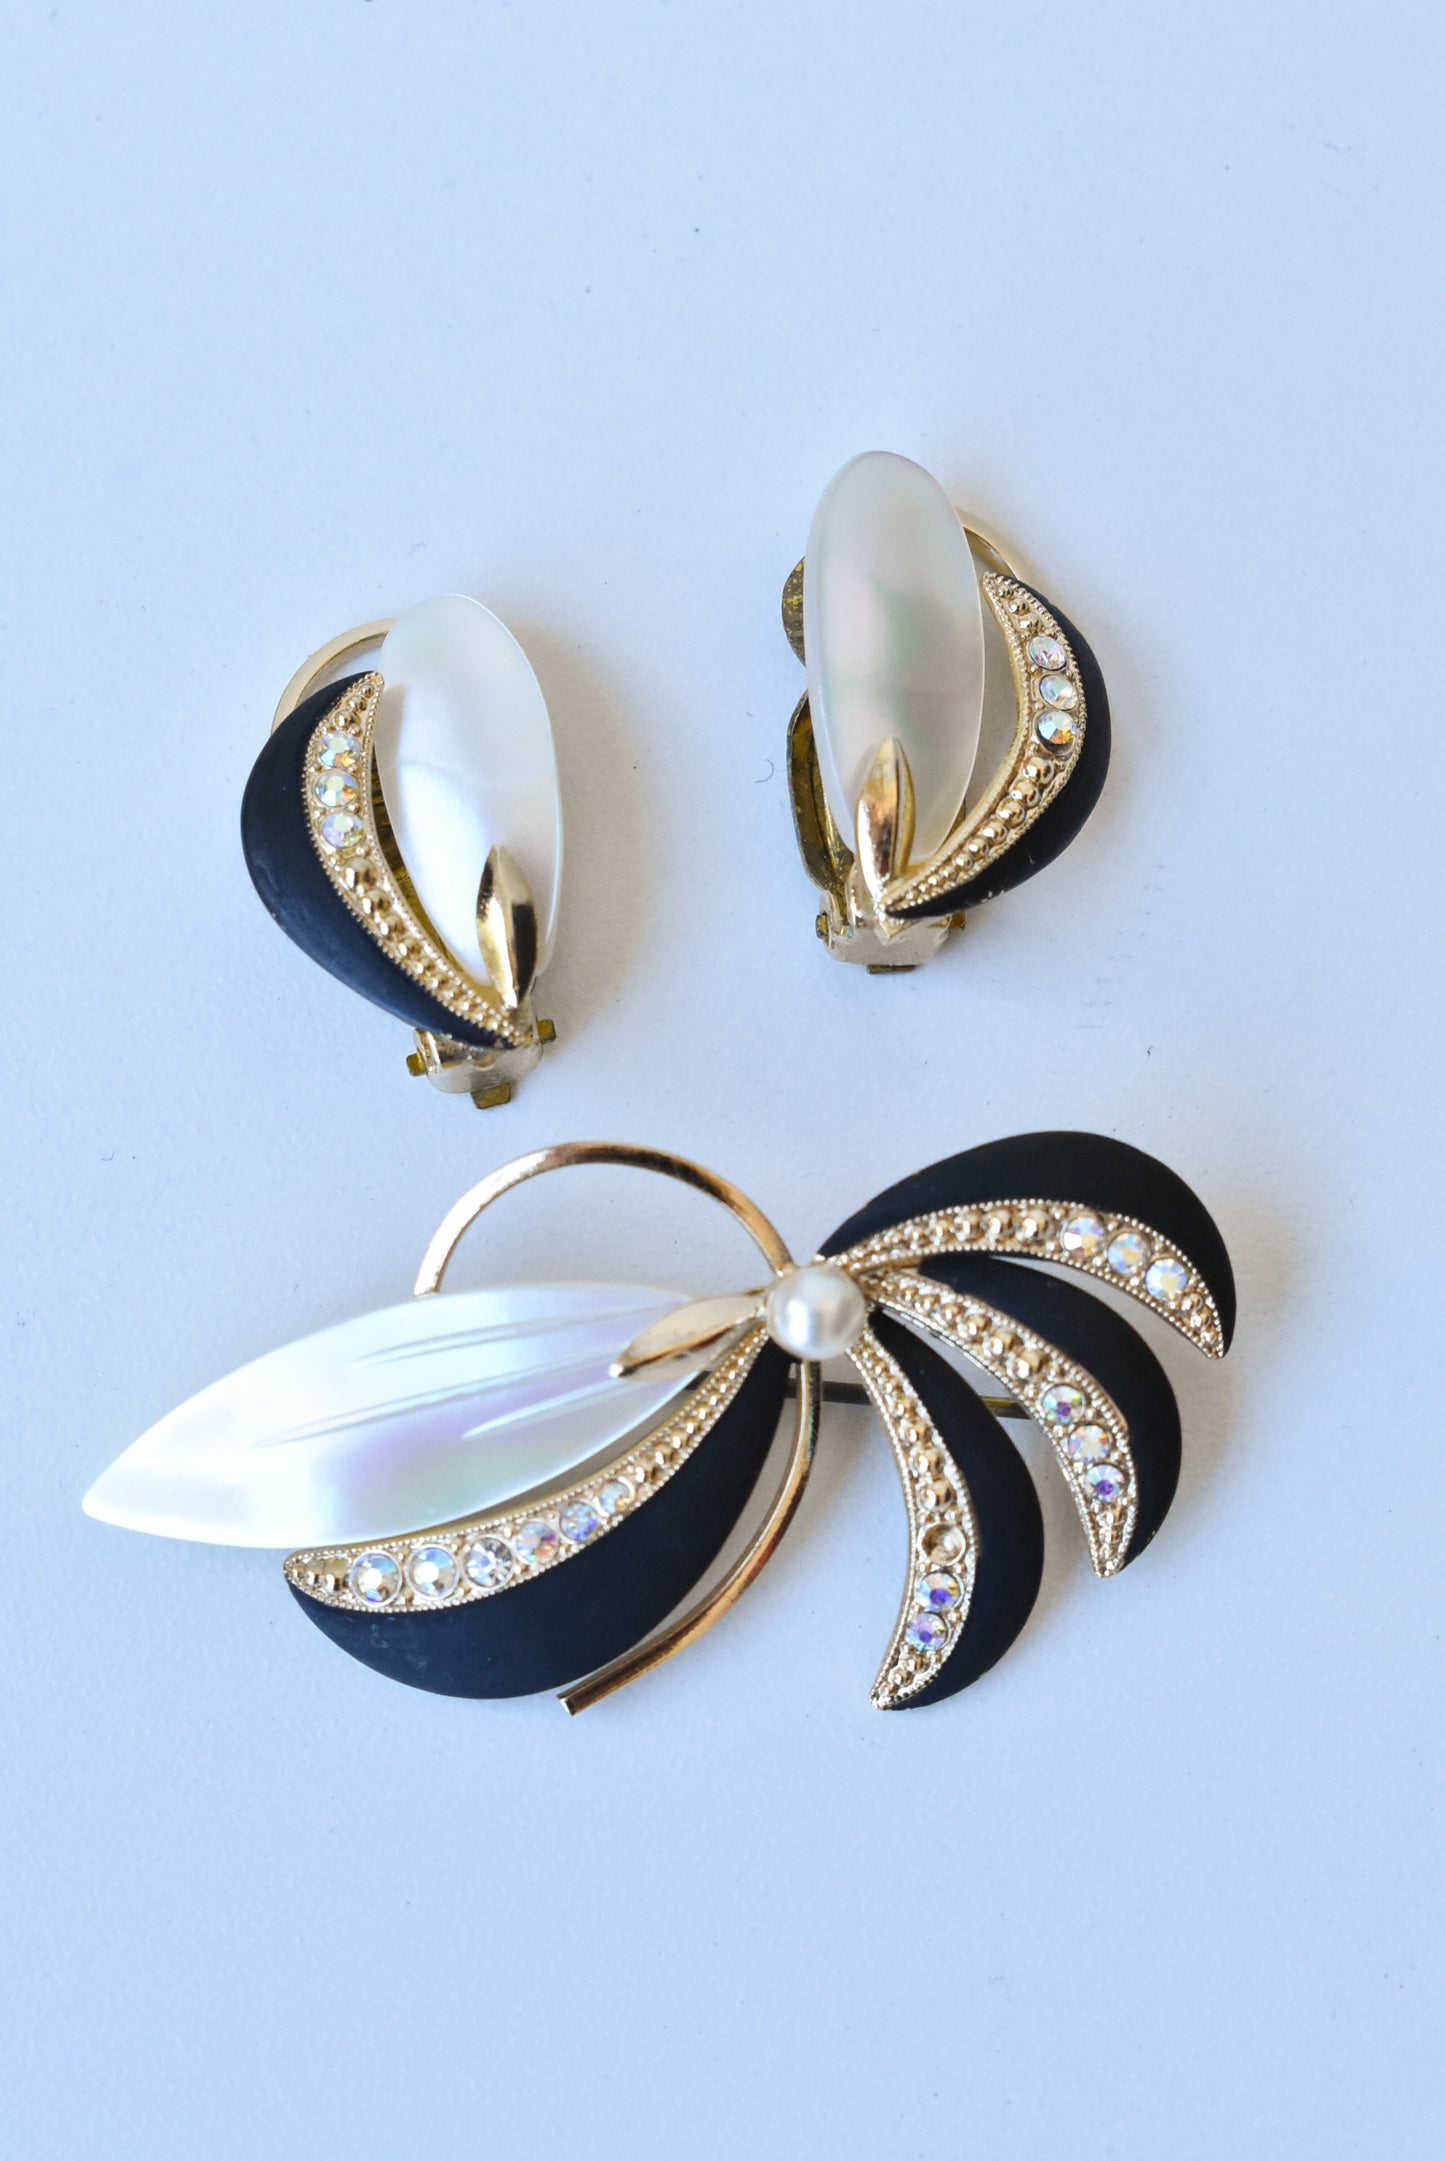 Vintage striking arched brooch and clip-on earrings